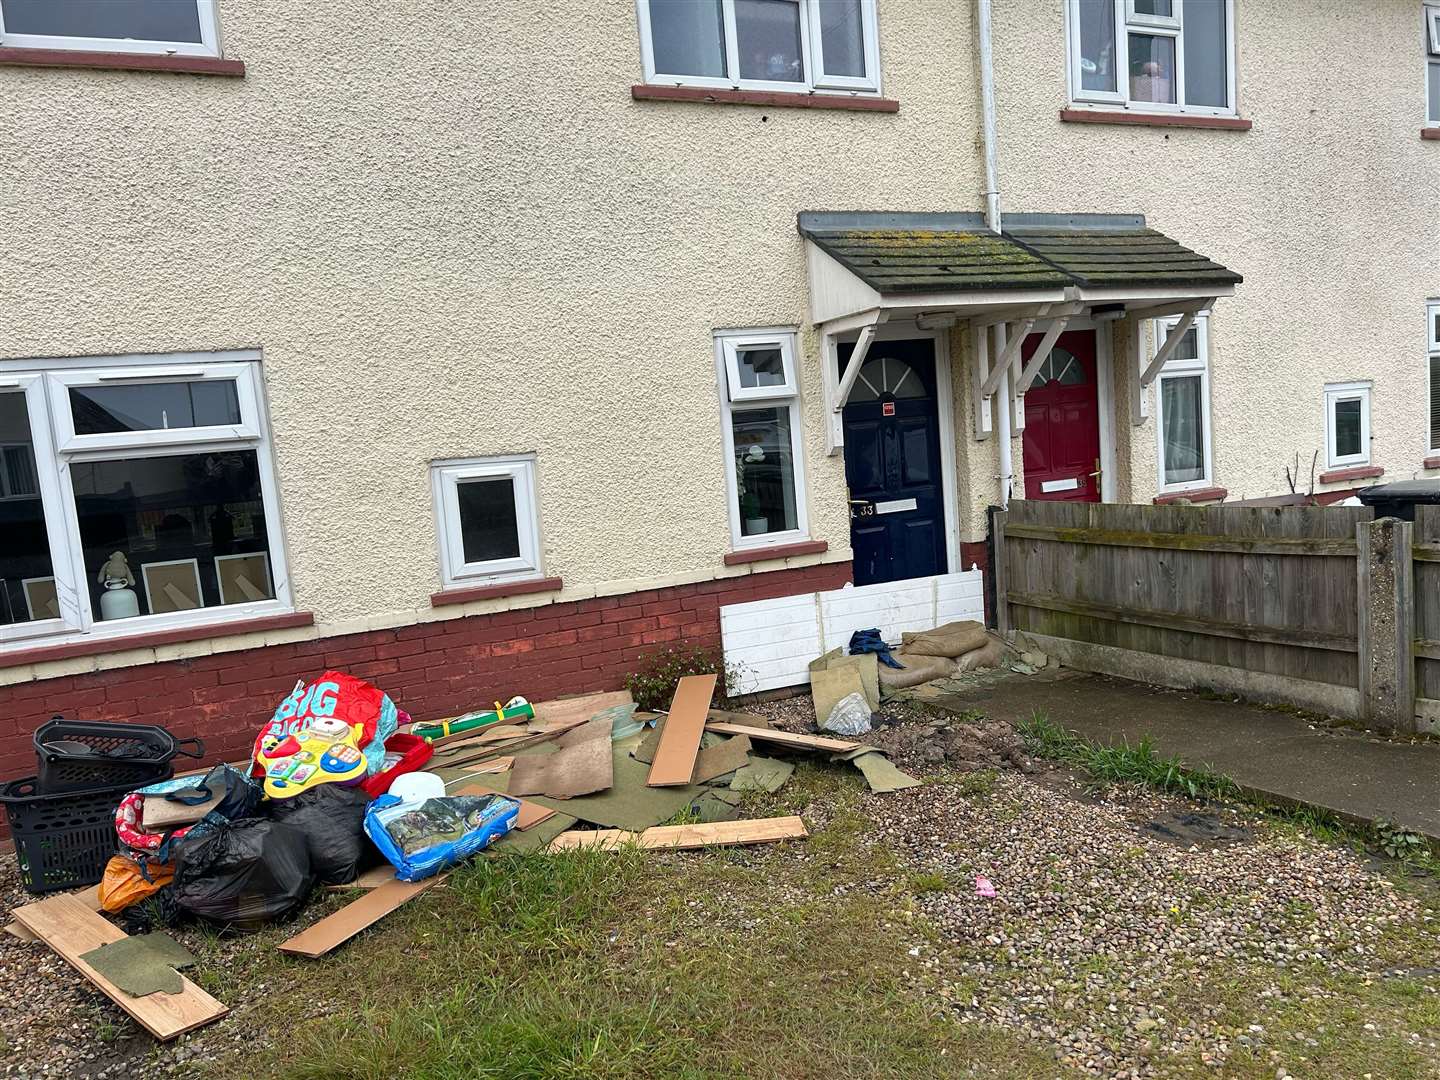 Residents have been left frustrated by constant flood damage at the Turbus Road homes